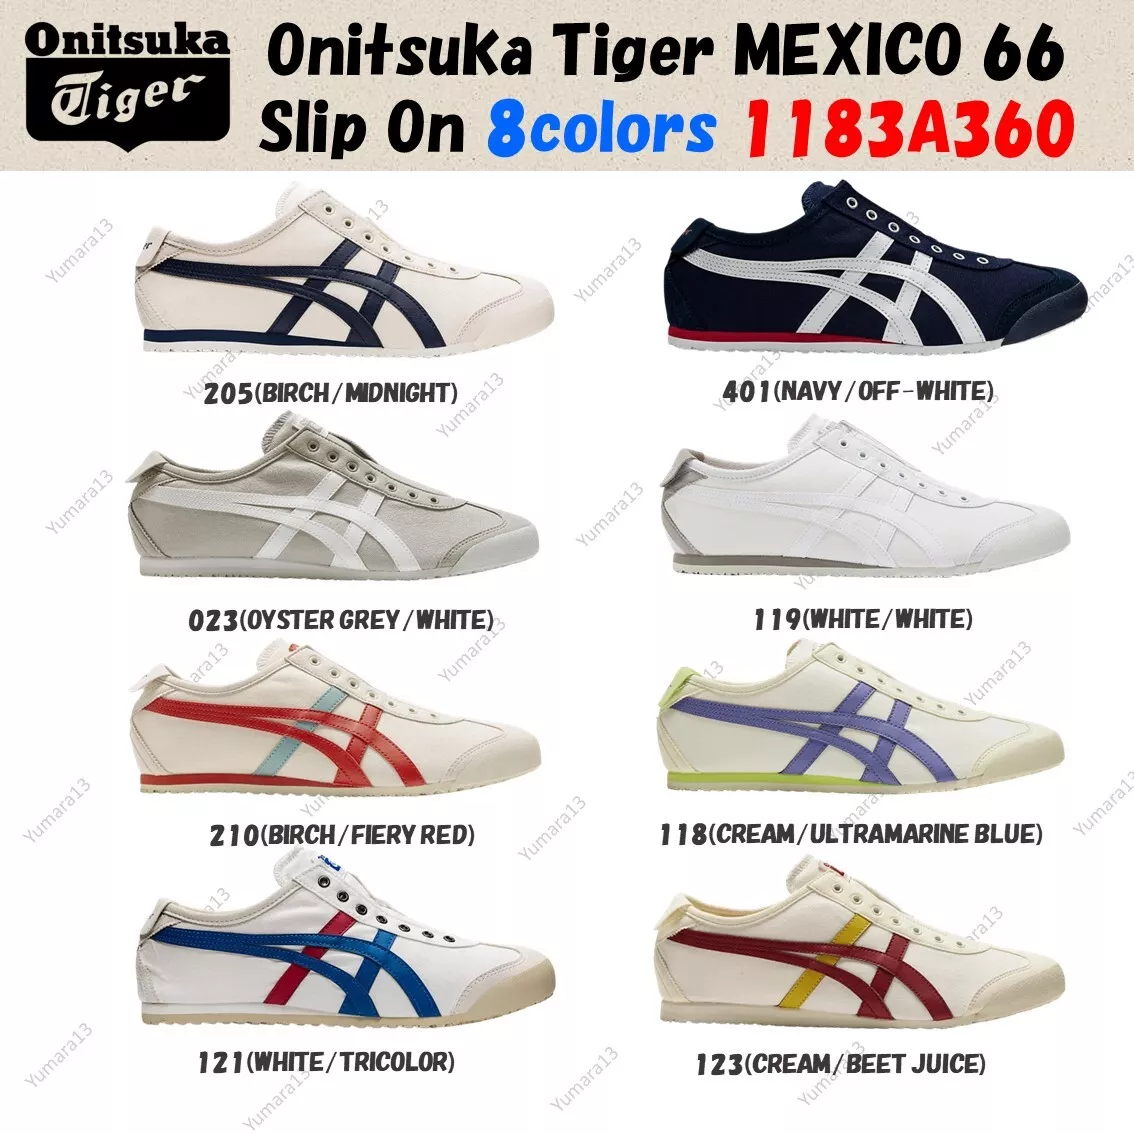 Onitsuka Tiger MEXICO 66 SLIP-ON Unisex Shoes 8colors 1183A360 4-14 Brand New eBay